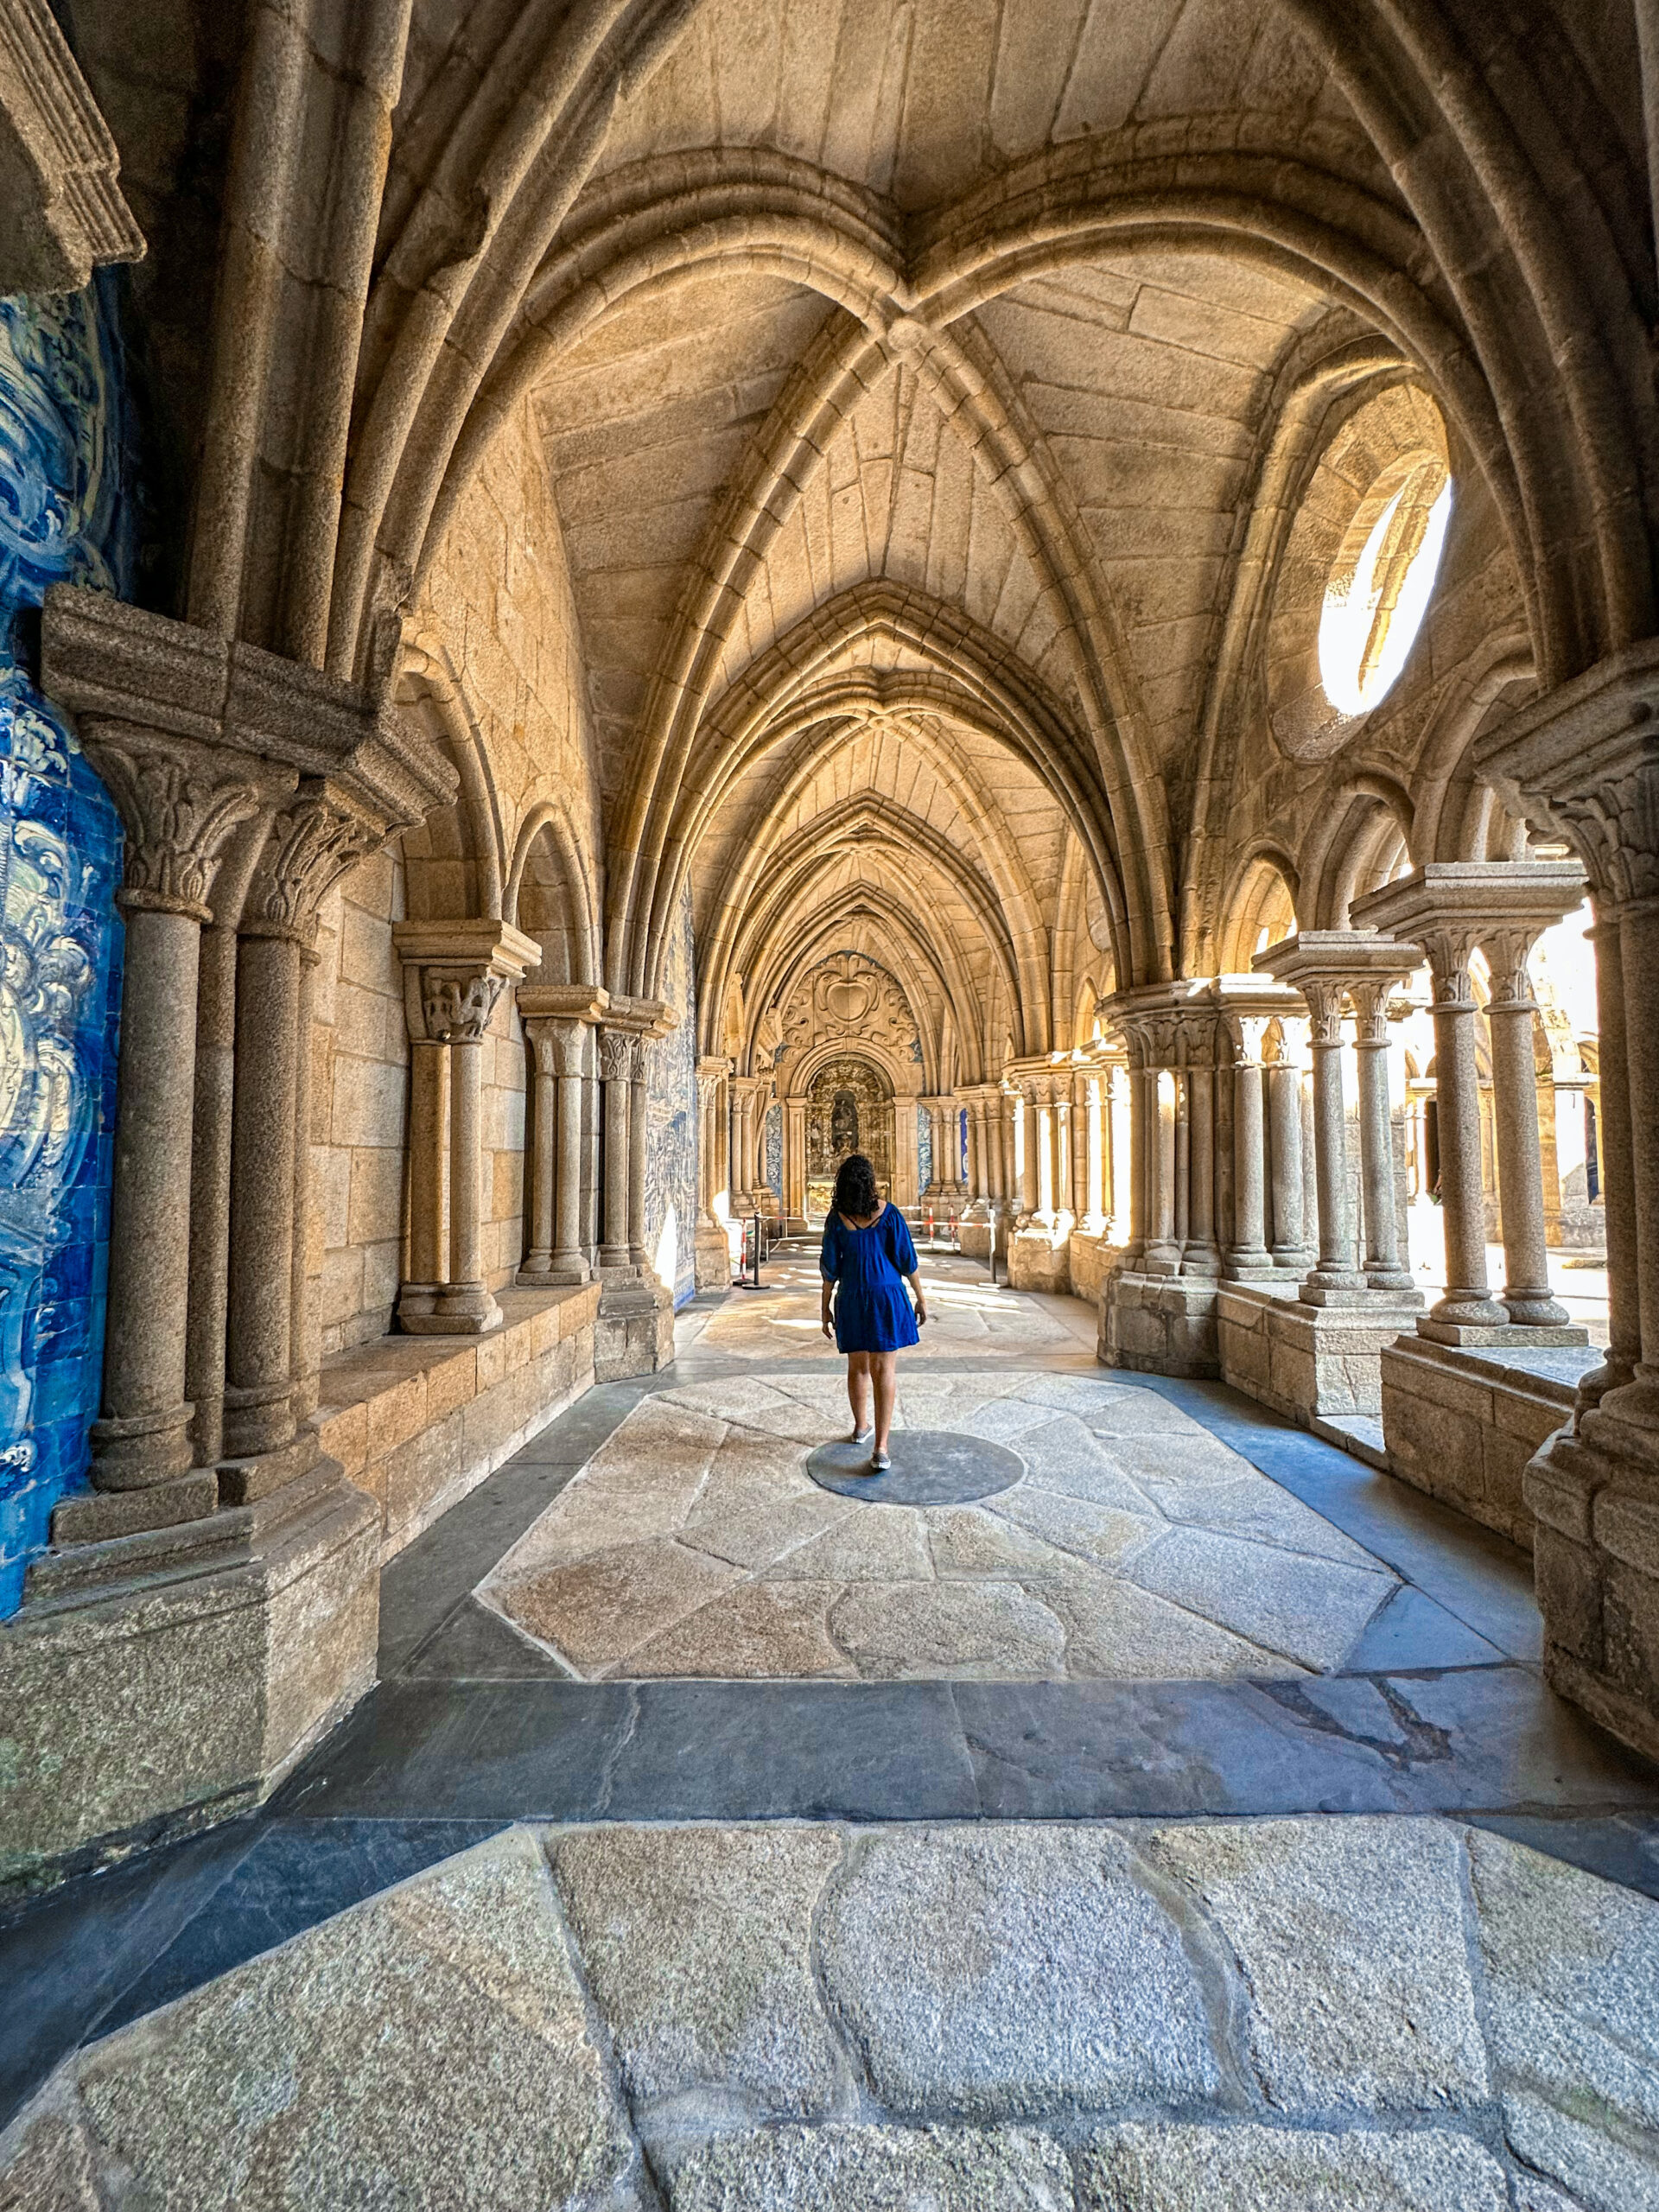 Porto's cathedral cloisters and tiles